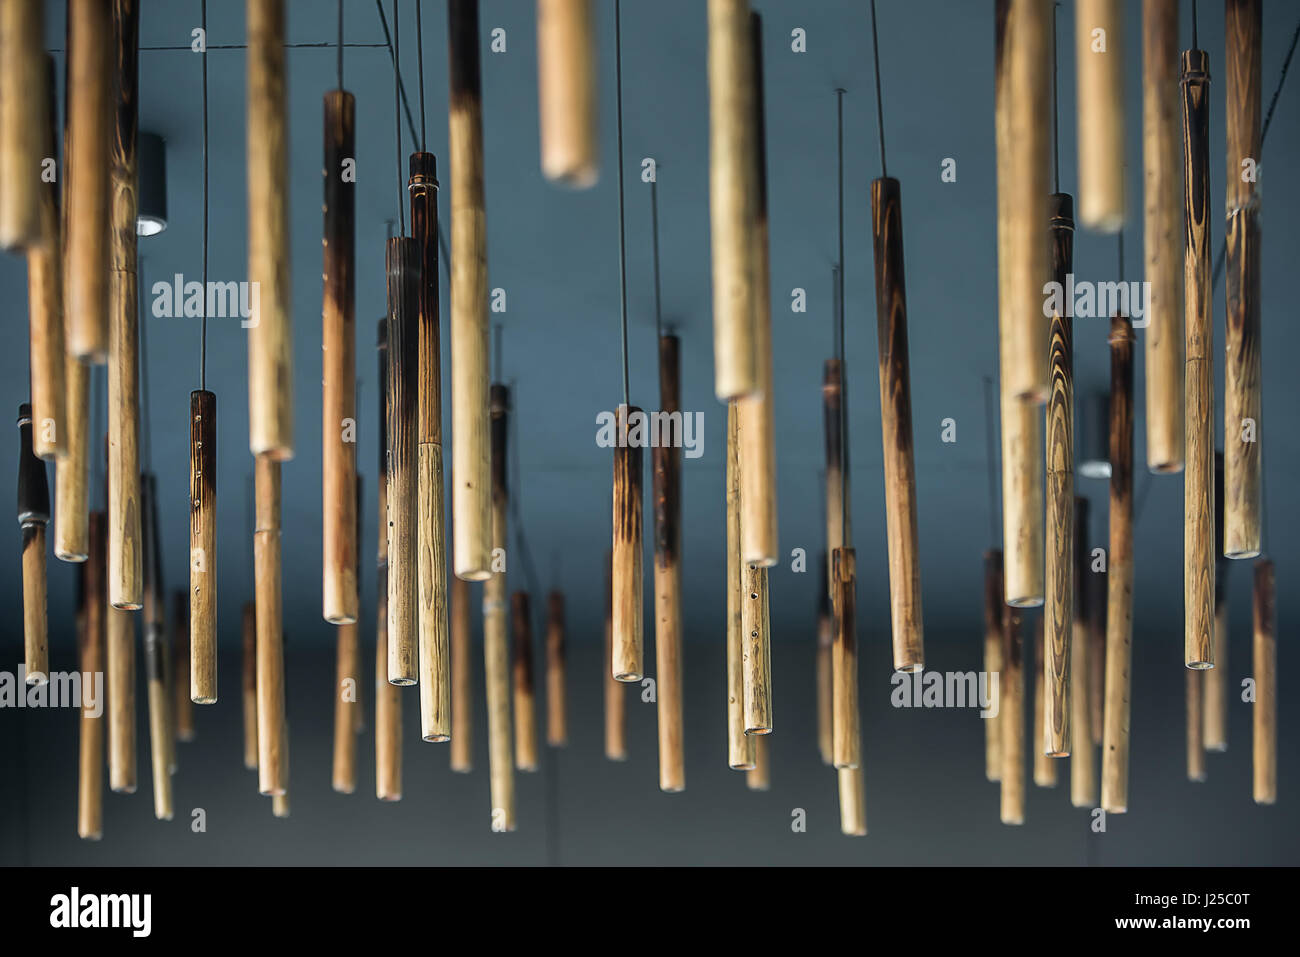 Hanging wooden tubes Stock Photo